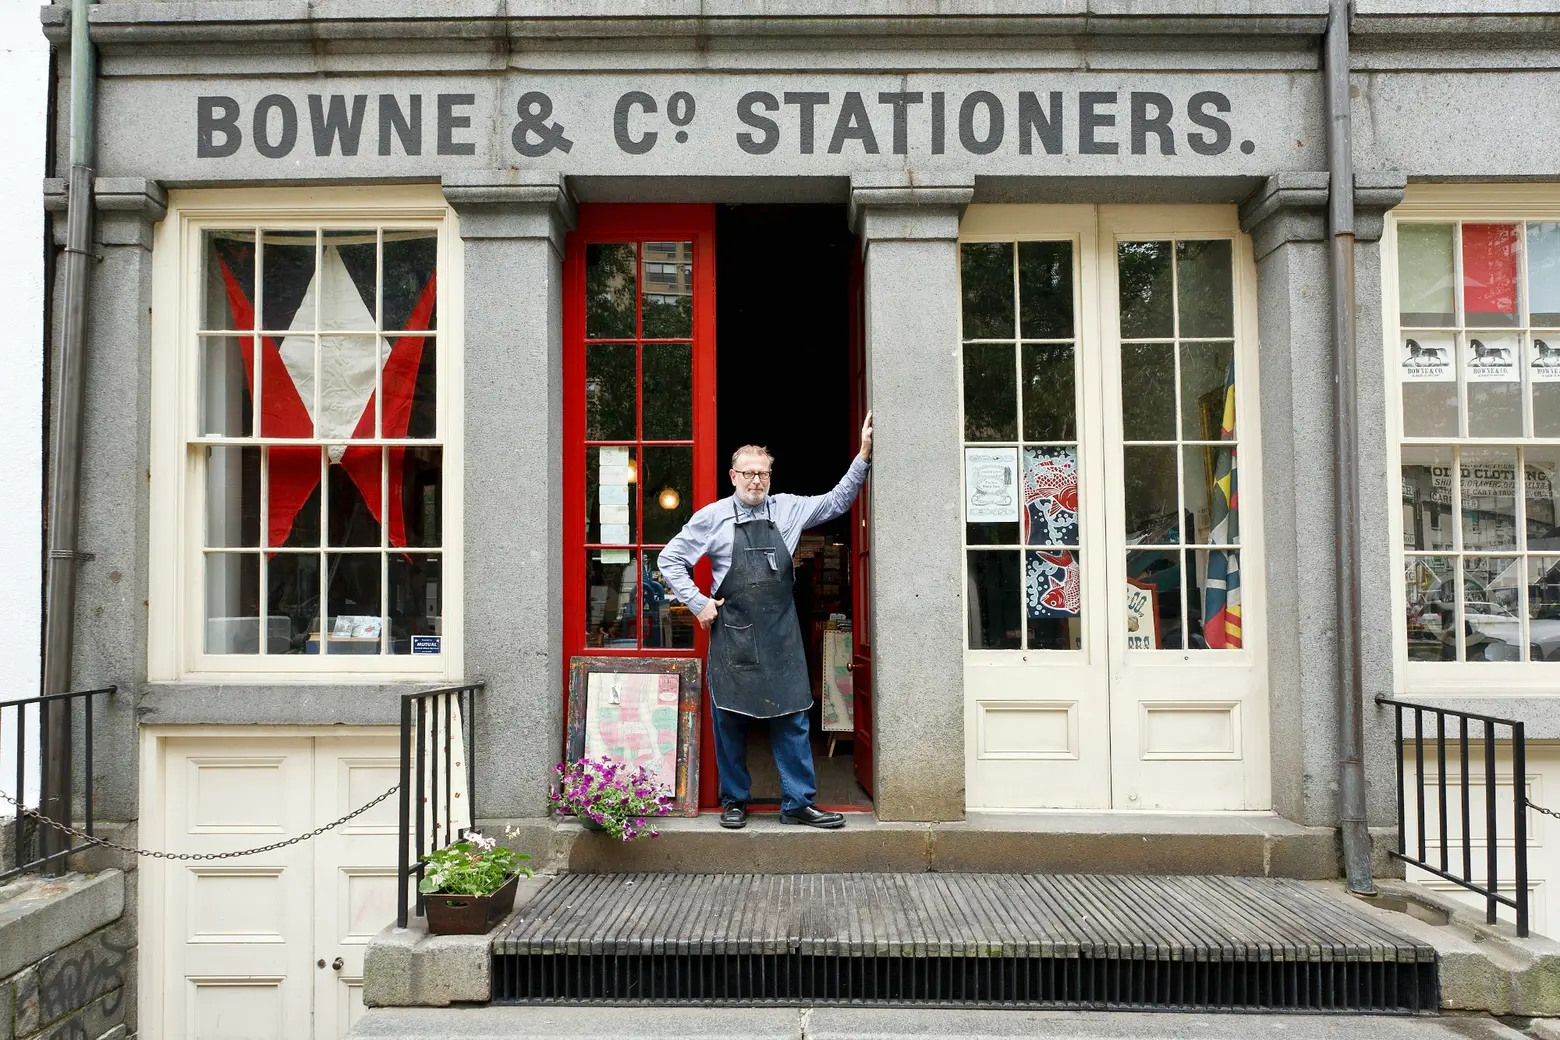 Bowne & Co. Stationers, South Street Seaport Museum, South Street Seaport Historic District